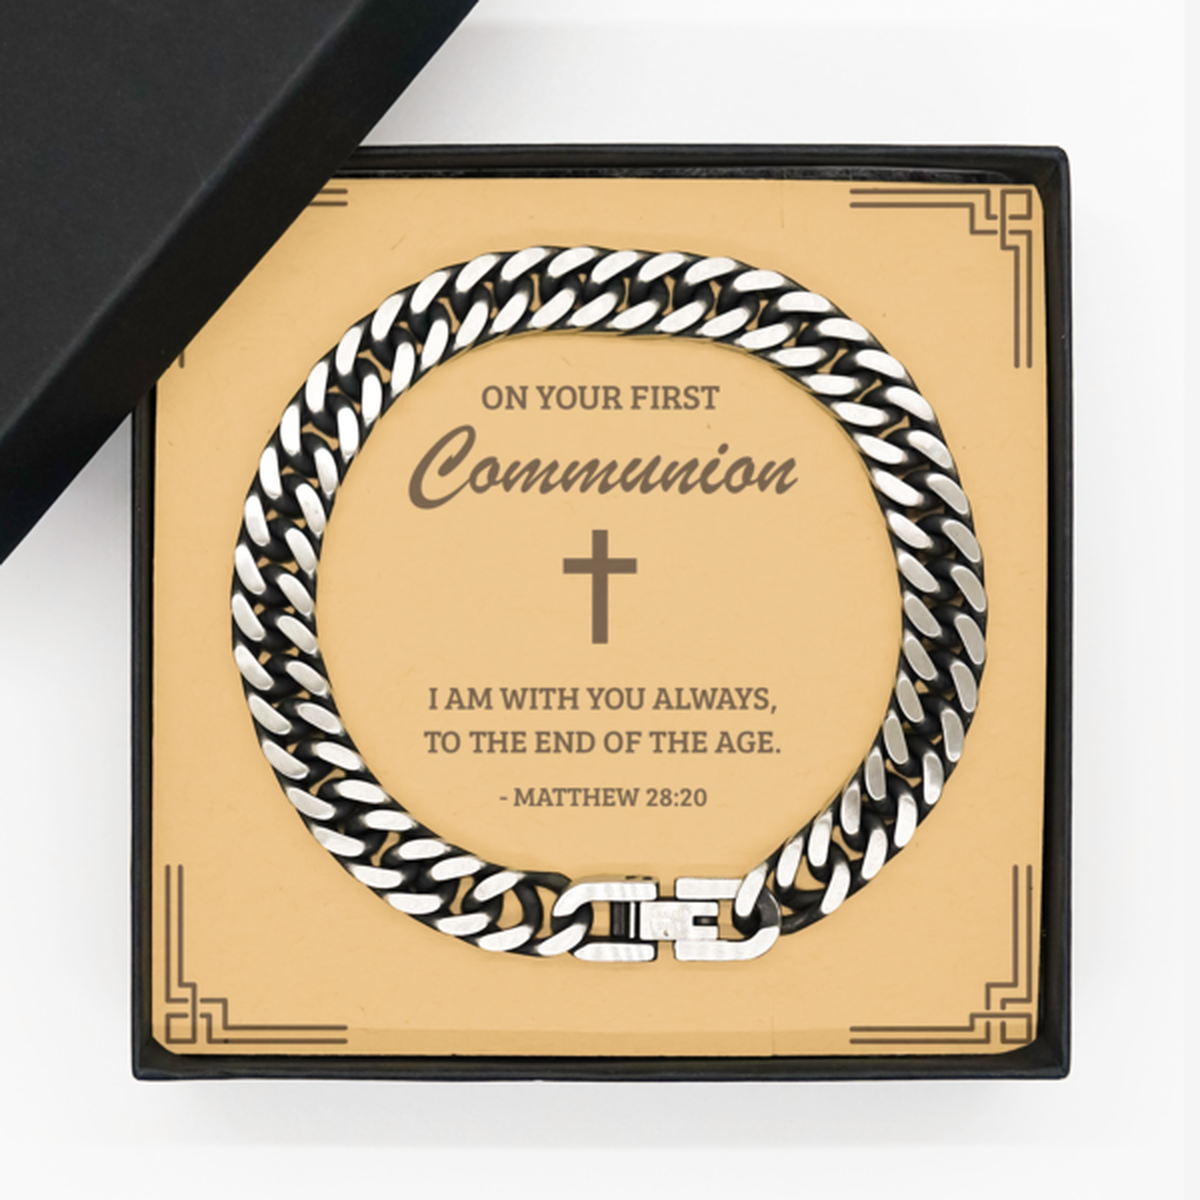 First Communion Gifts for Teenage Boys, I am with you always, Cuban Link Chain Bracelet with Bible Verse Message Card, Religious Catholic Bracelet for Son, Grandson, Dad, Godfather